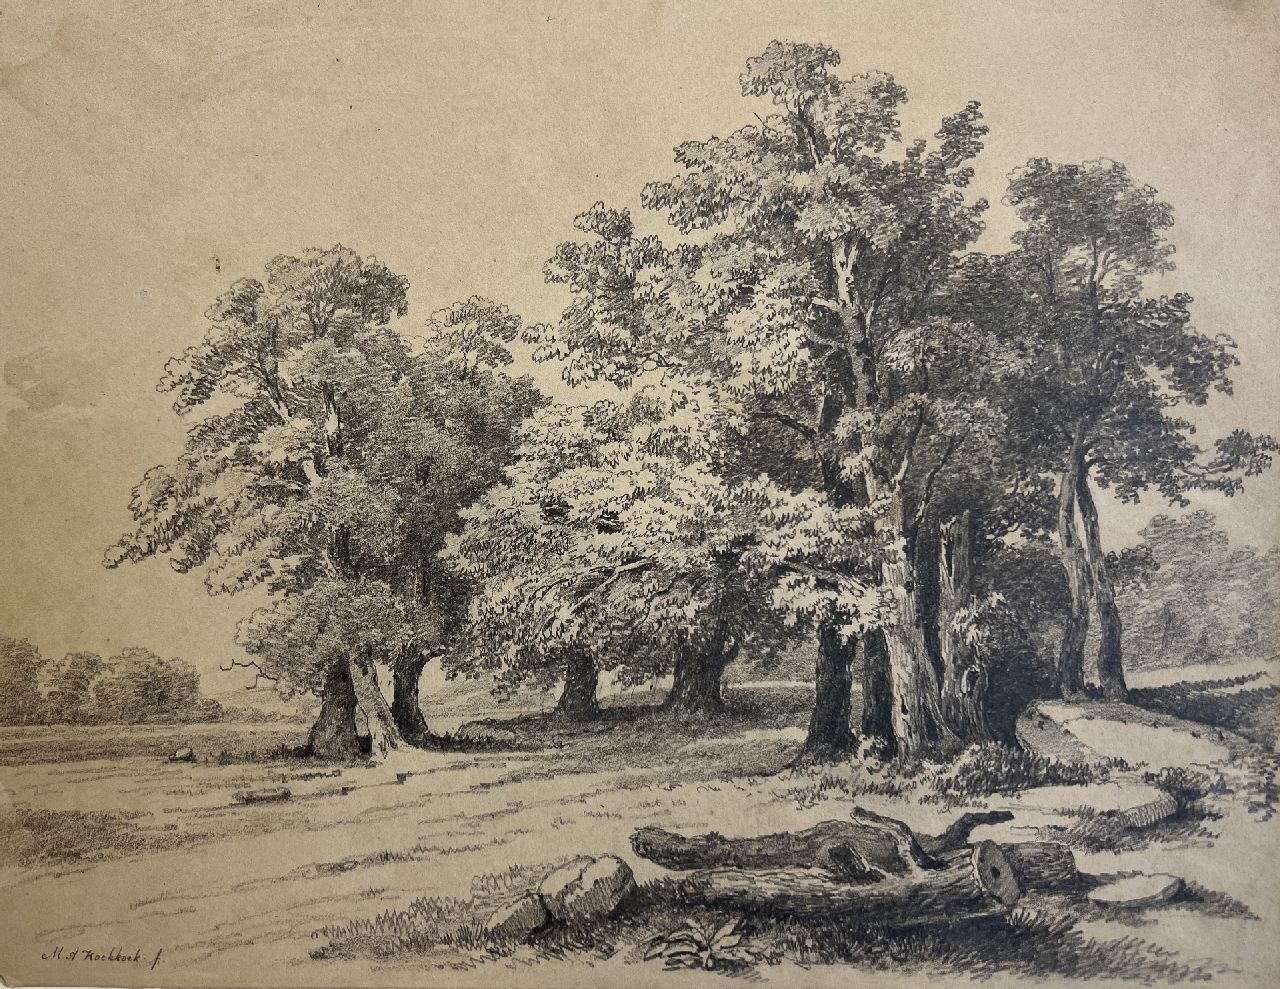 Koekkoek I M.A.  | Marinus Adrianus Koekkoek I | Watercolours and drawings offered for sale | Landscape with old oak trees, pencil on paper 24.5 x 32.0 cm, signed l.l.